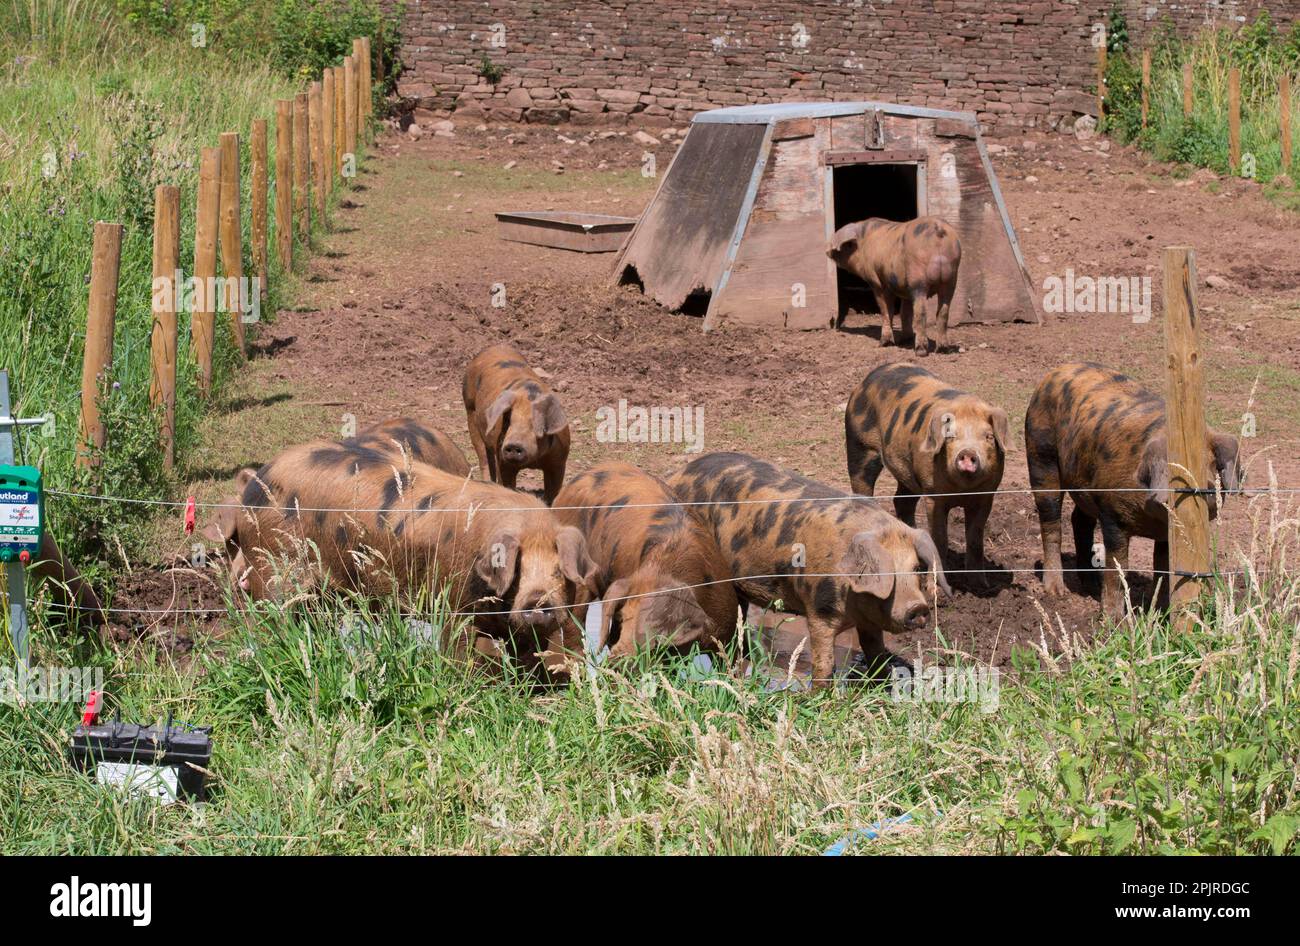 Domestic Pig, Oxford Sandy and Black, weaners in paddock with ark and electric fence, Cumbria, England, United Kingdom Stock Photo